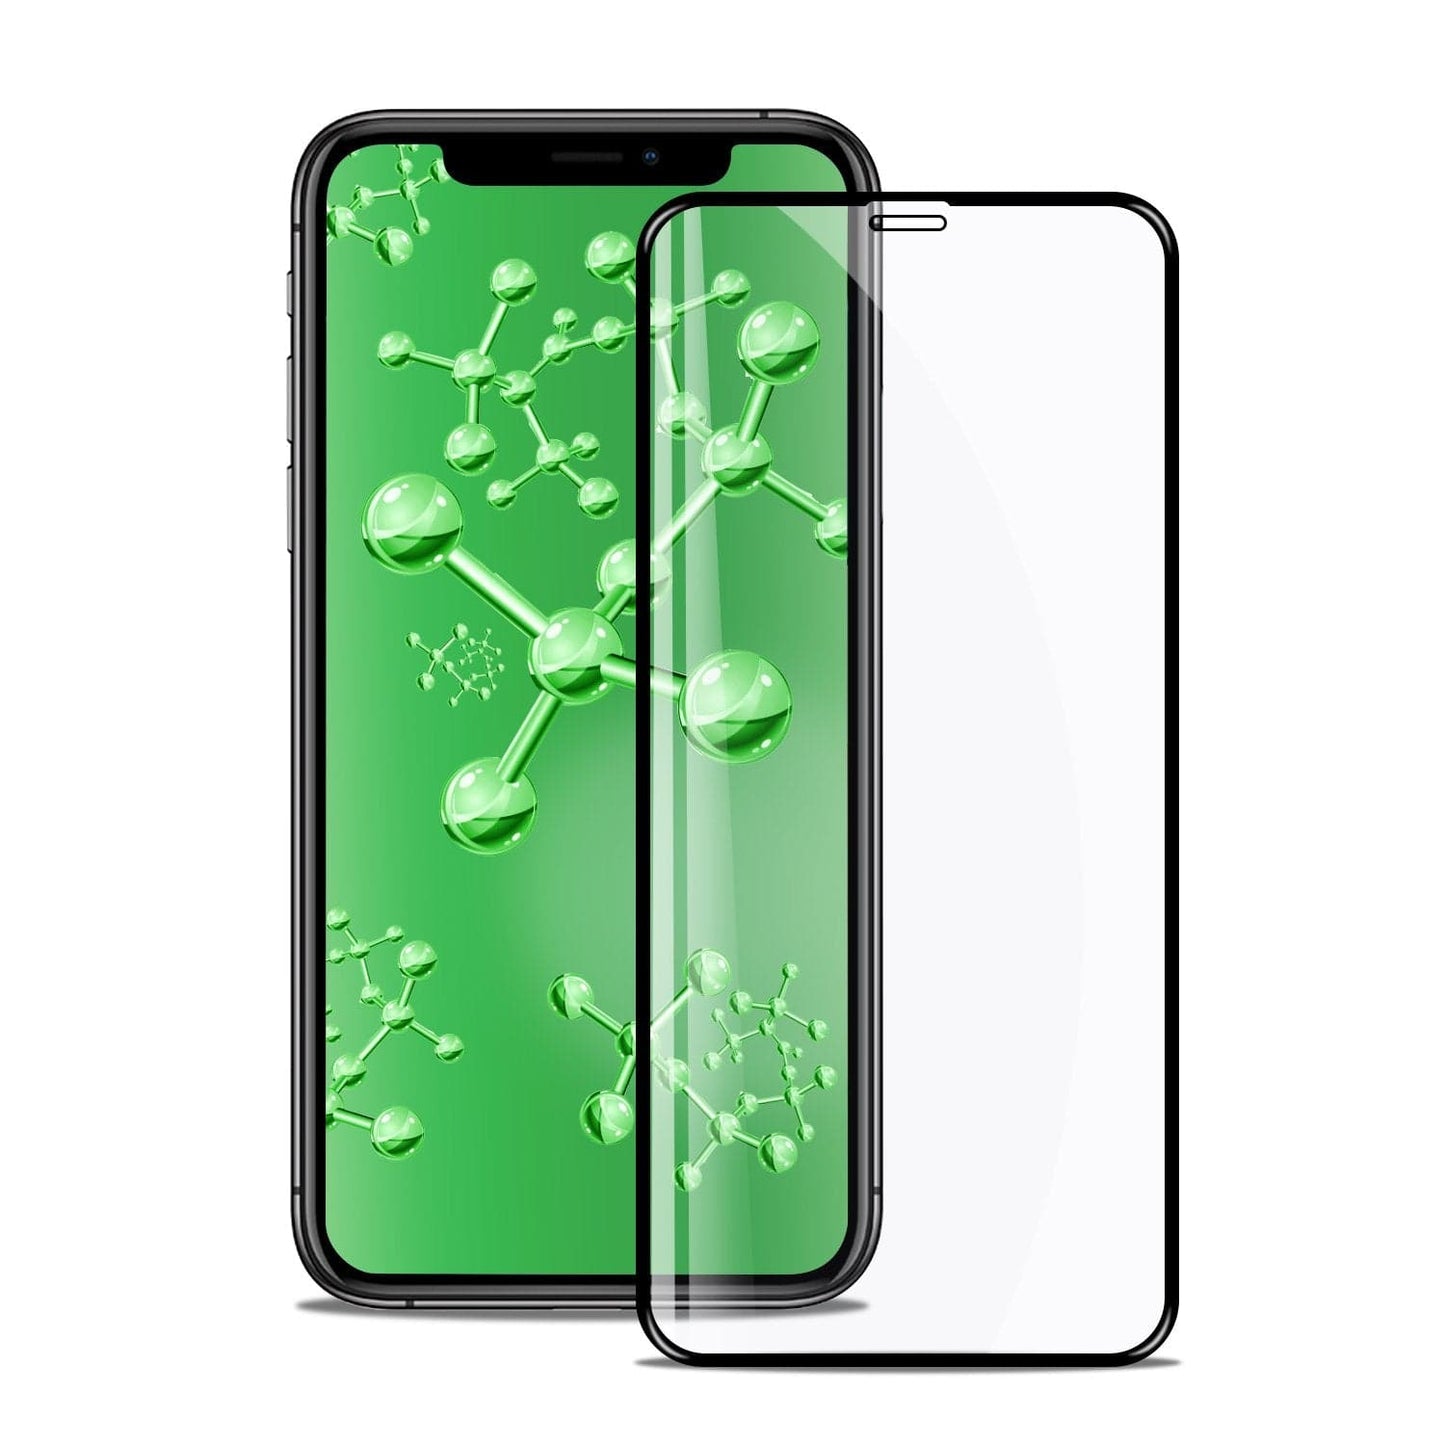 iPhone 11 Pro Max Tempered Glass Screen Protector Tough on Antibacterial